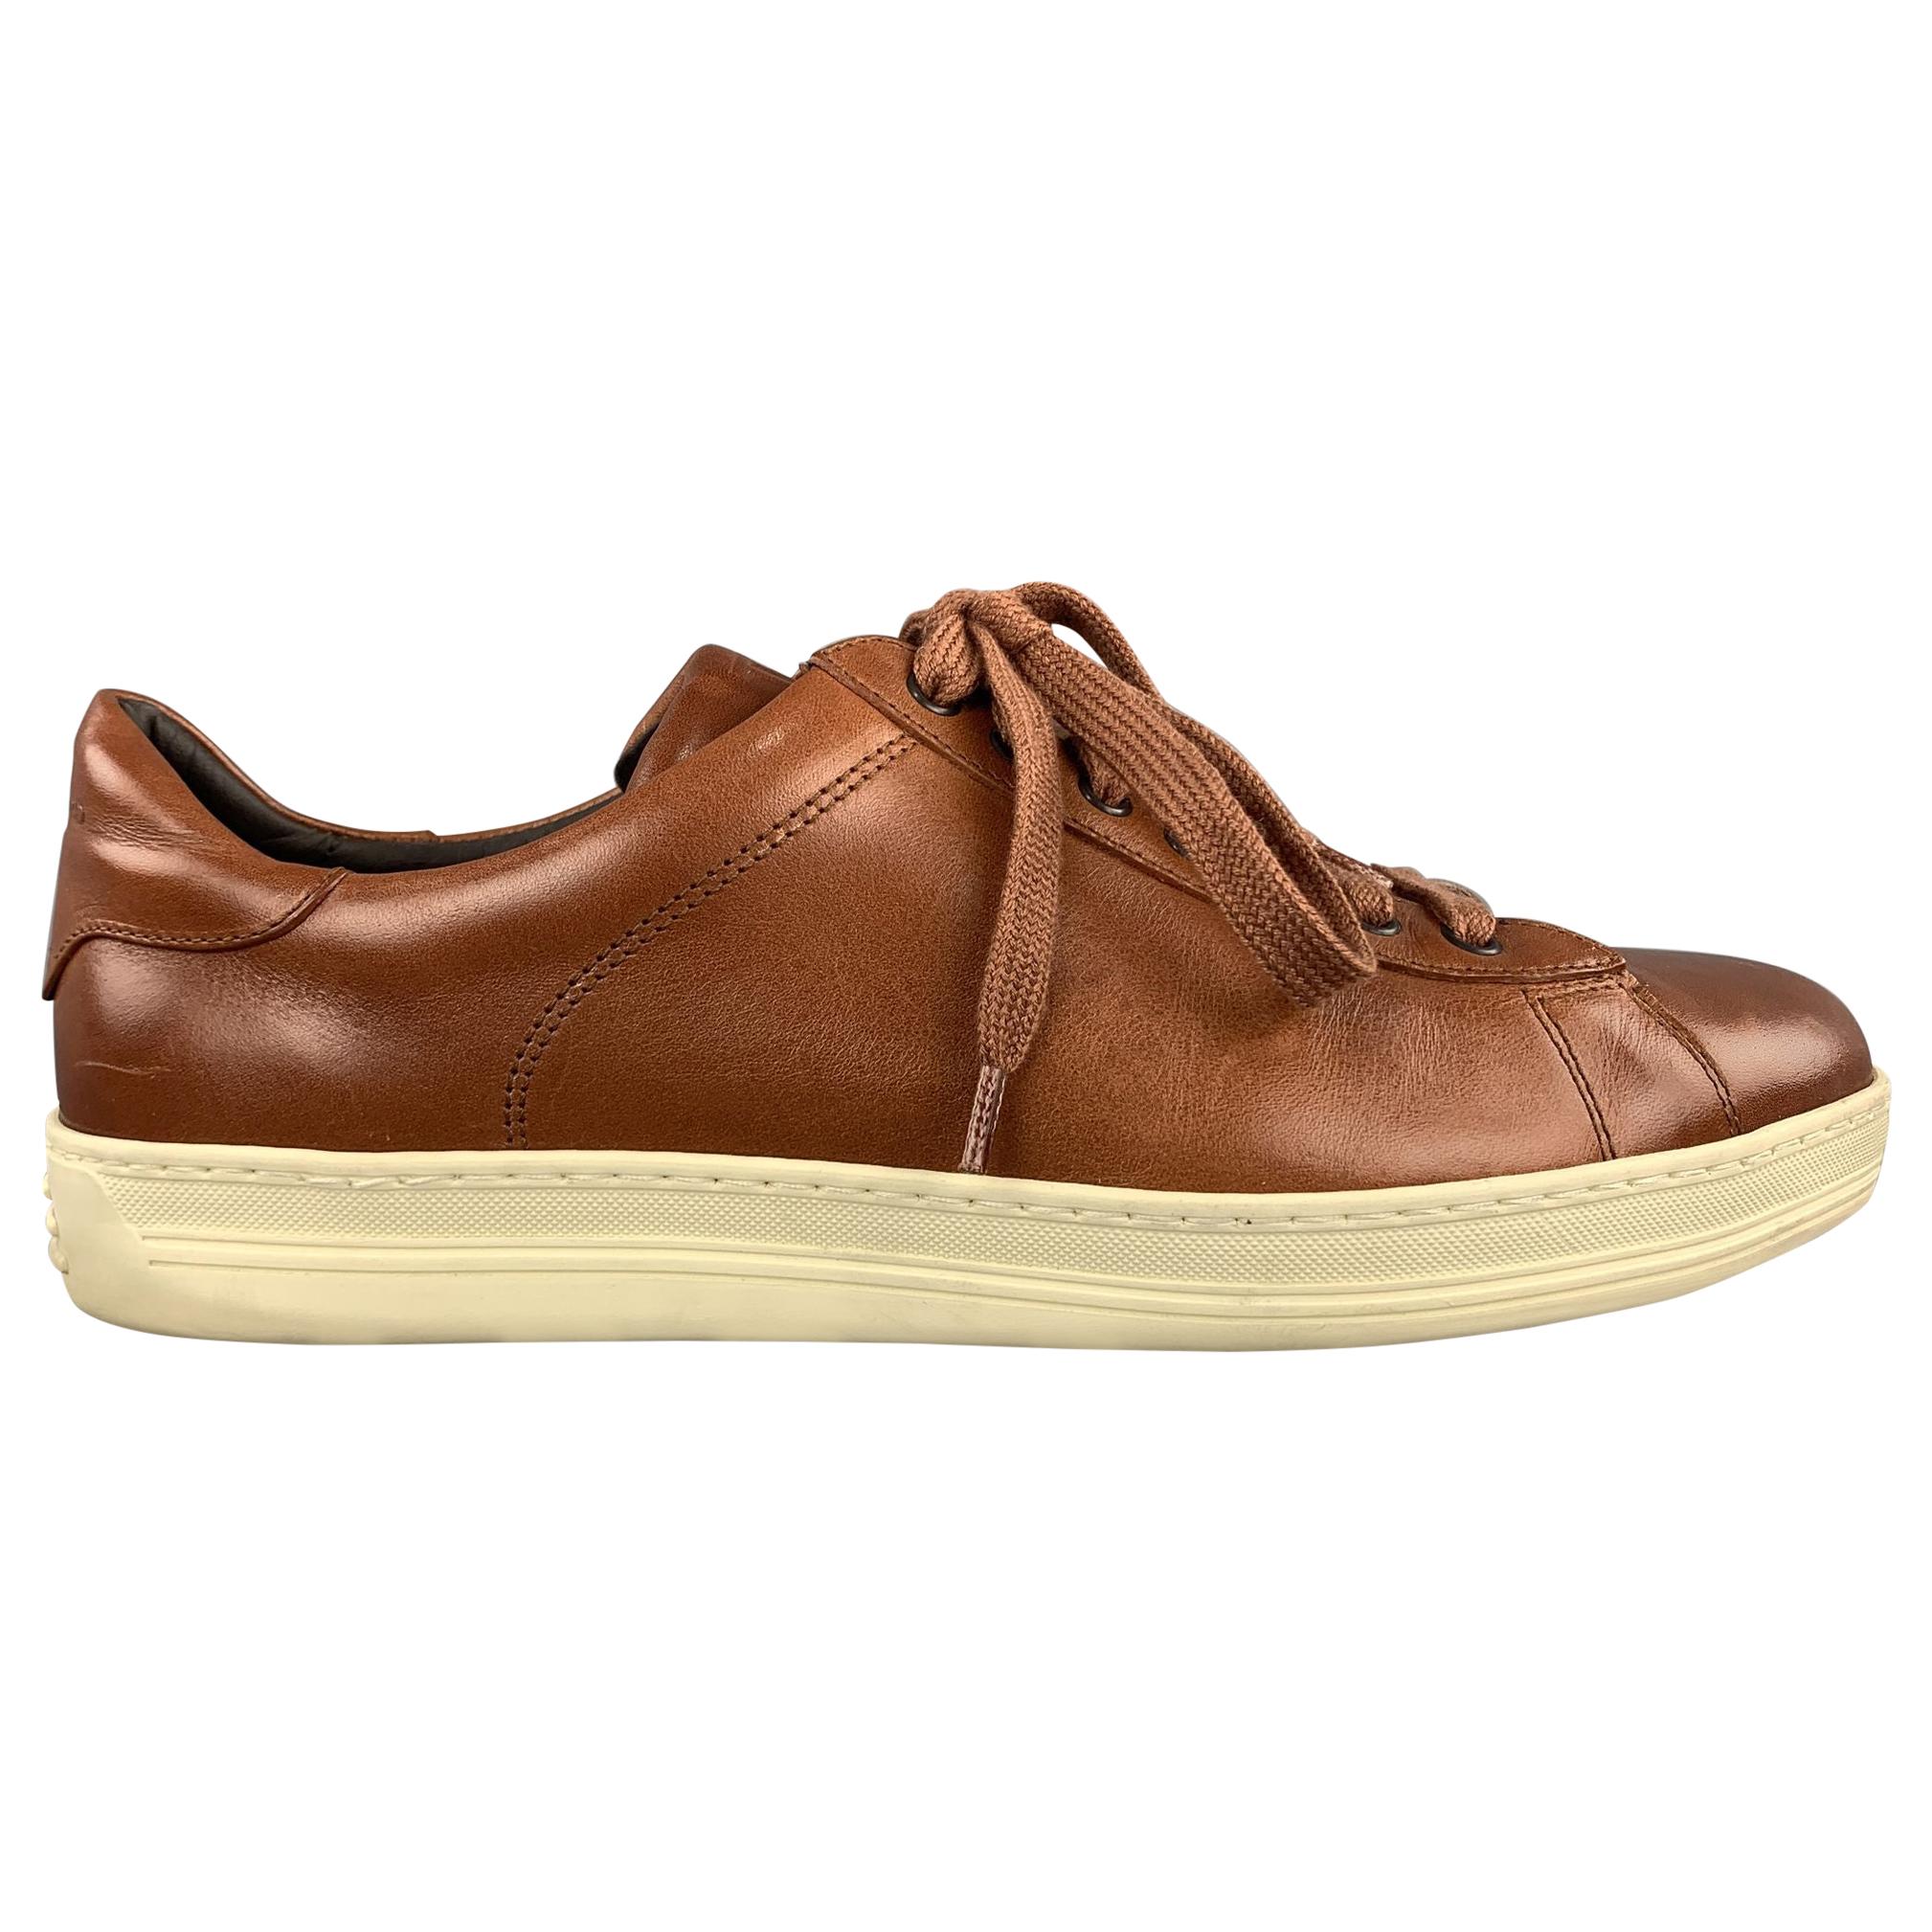 TOM FORD Size 11 Tan Solid Leather Lace Up Sneakers